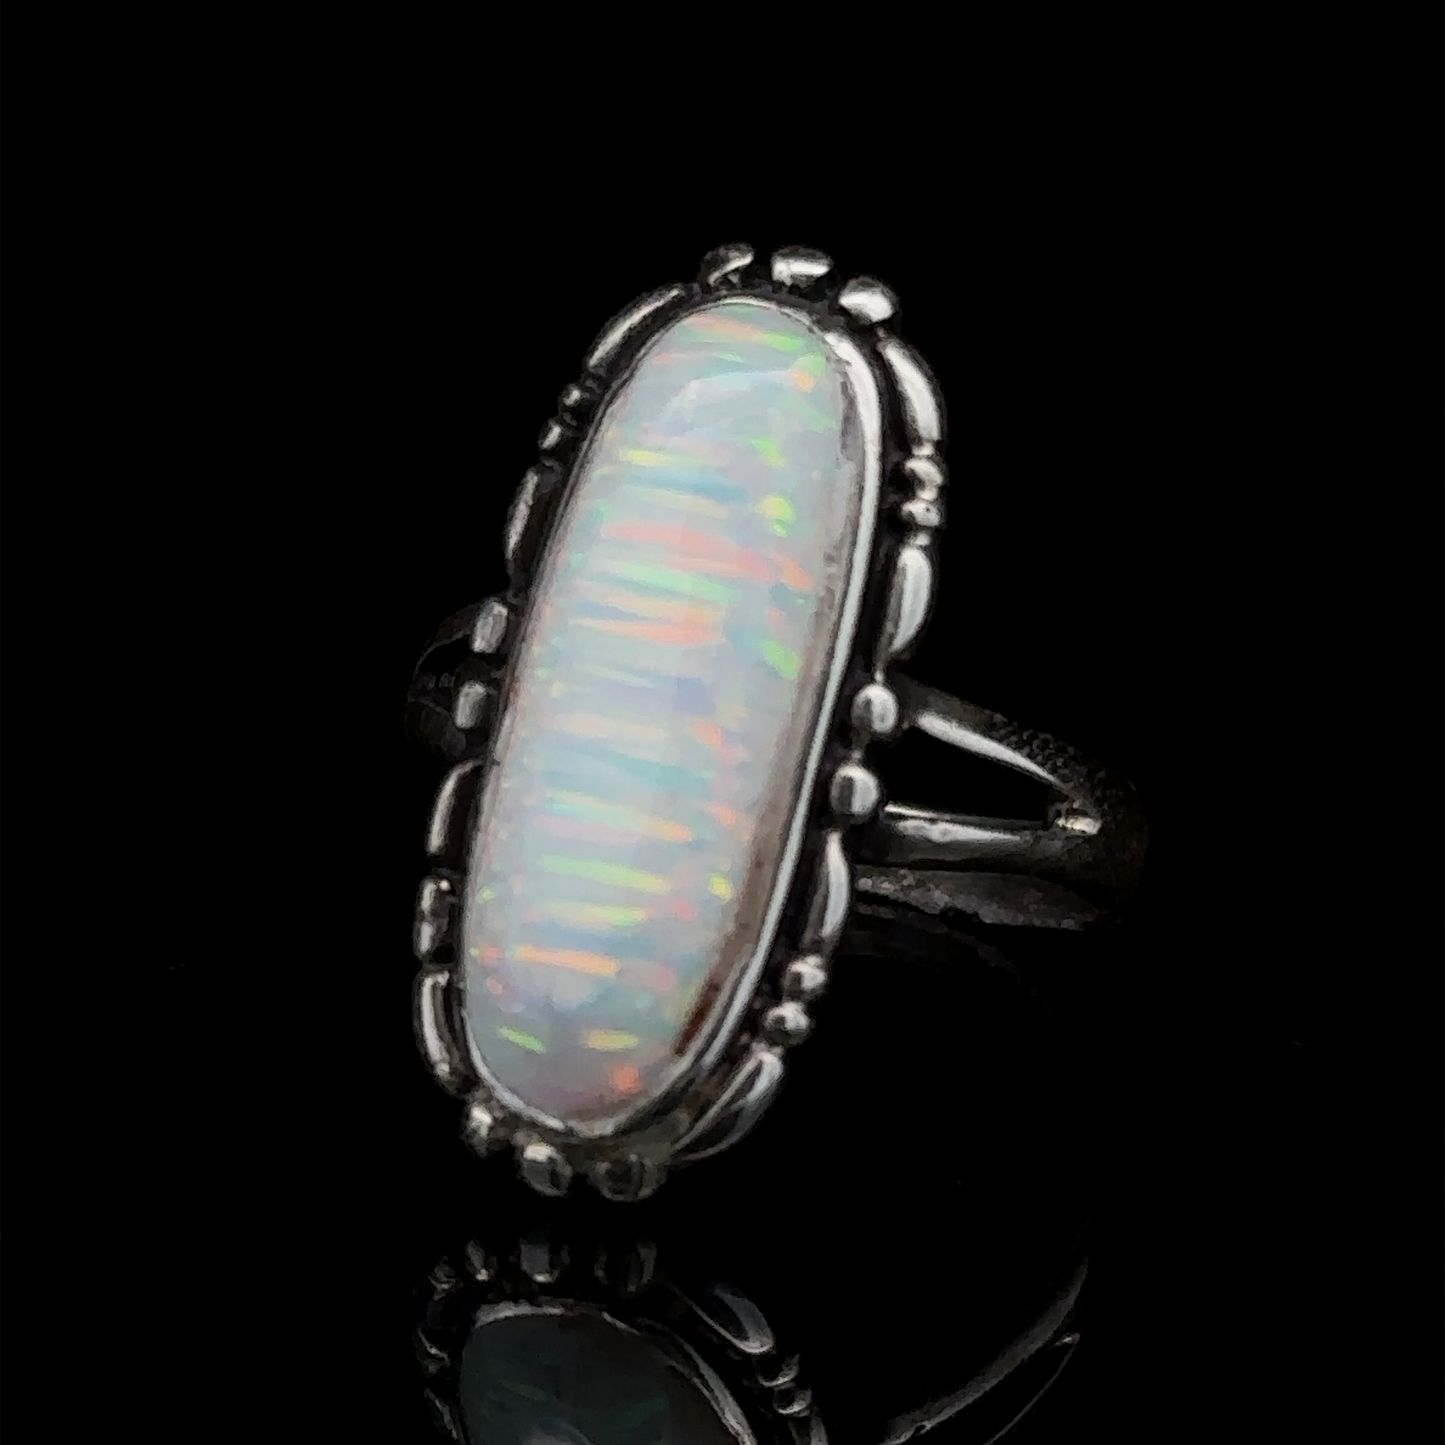 
                  
                    A sterling silver ring featuring an elongated, lab-created opal gemstone with iridescent colors, placed against a black background.

Adjusted Sentence: An American Made Oval Opal Ring featuring an elongated, lab-created opal gemstone with iridescent colors, placed against a black background.
                  
                